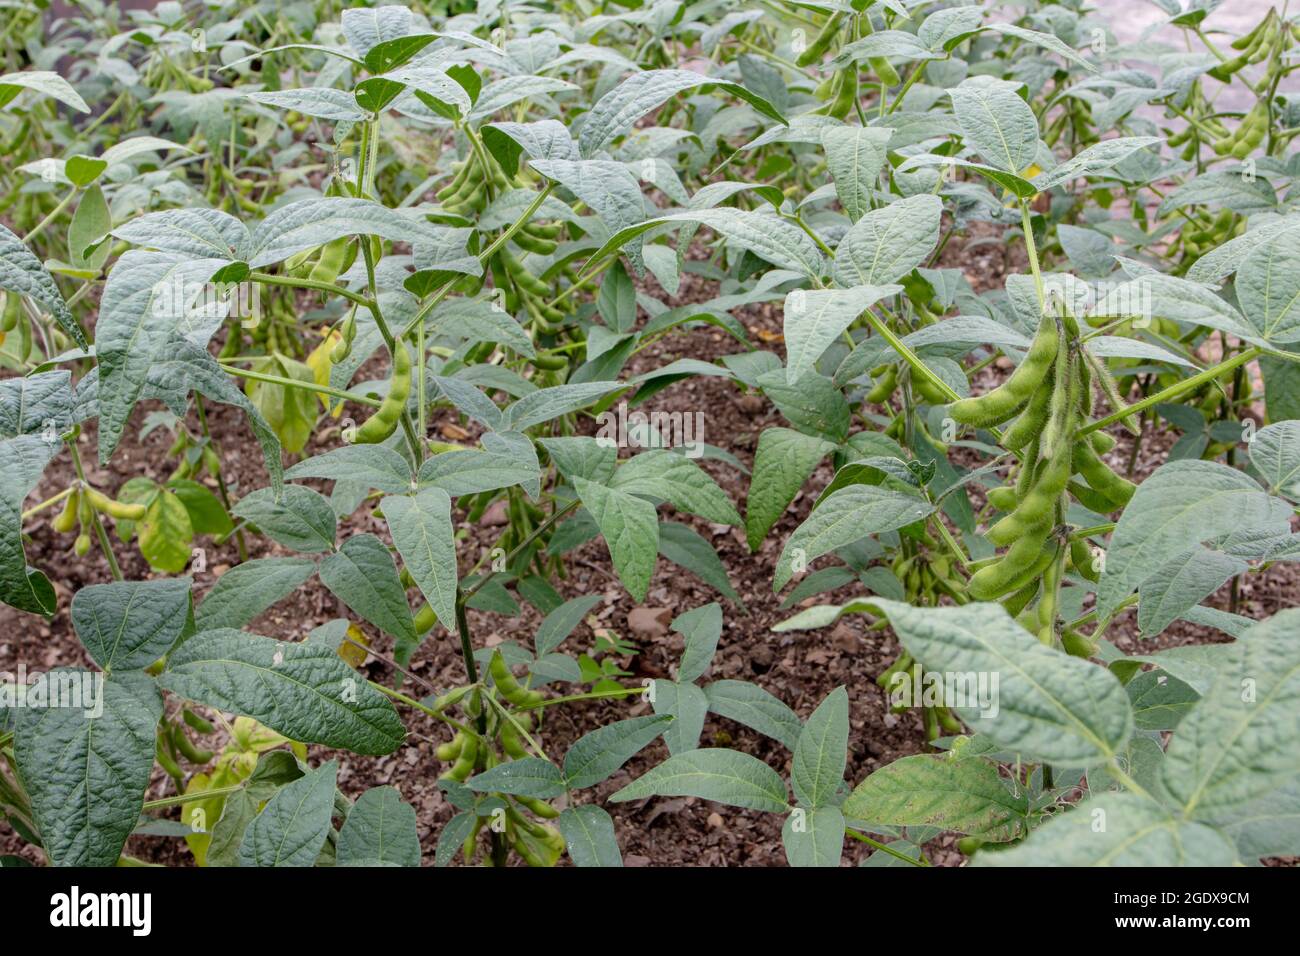 Glycine max plants with beans. Soybean or soya bean plantation. Stock Photo